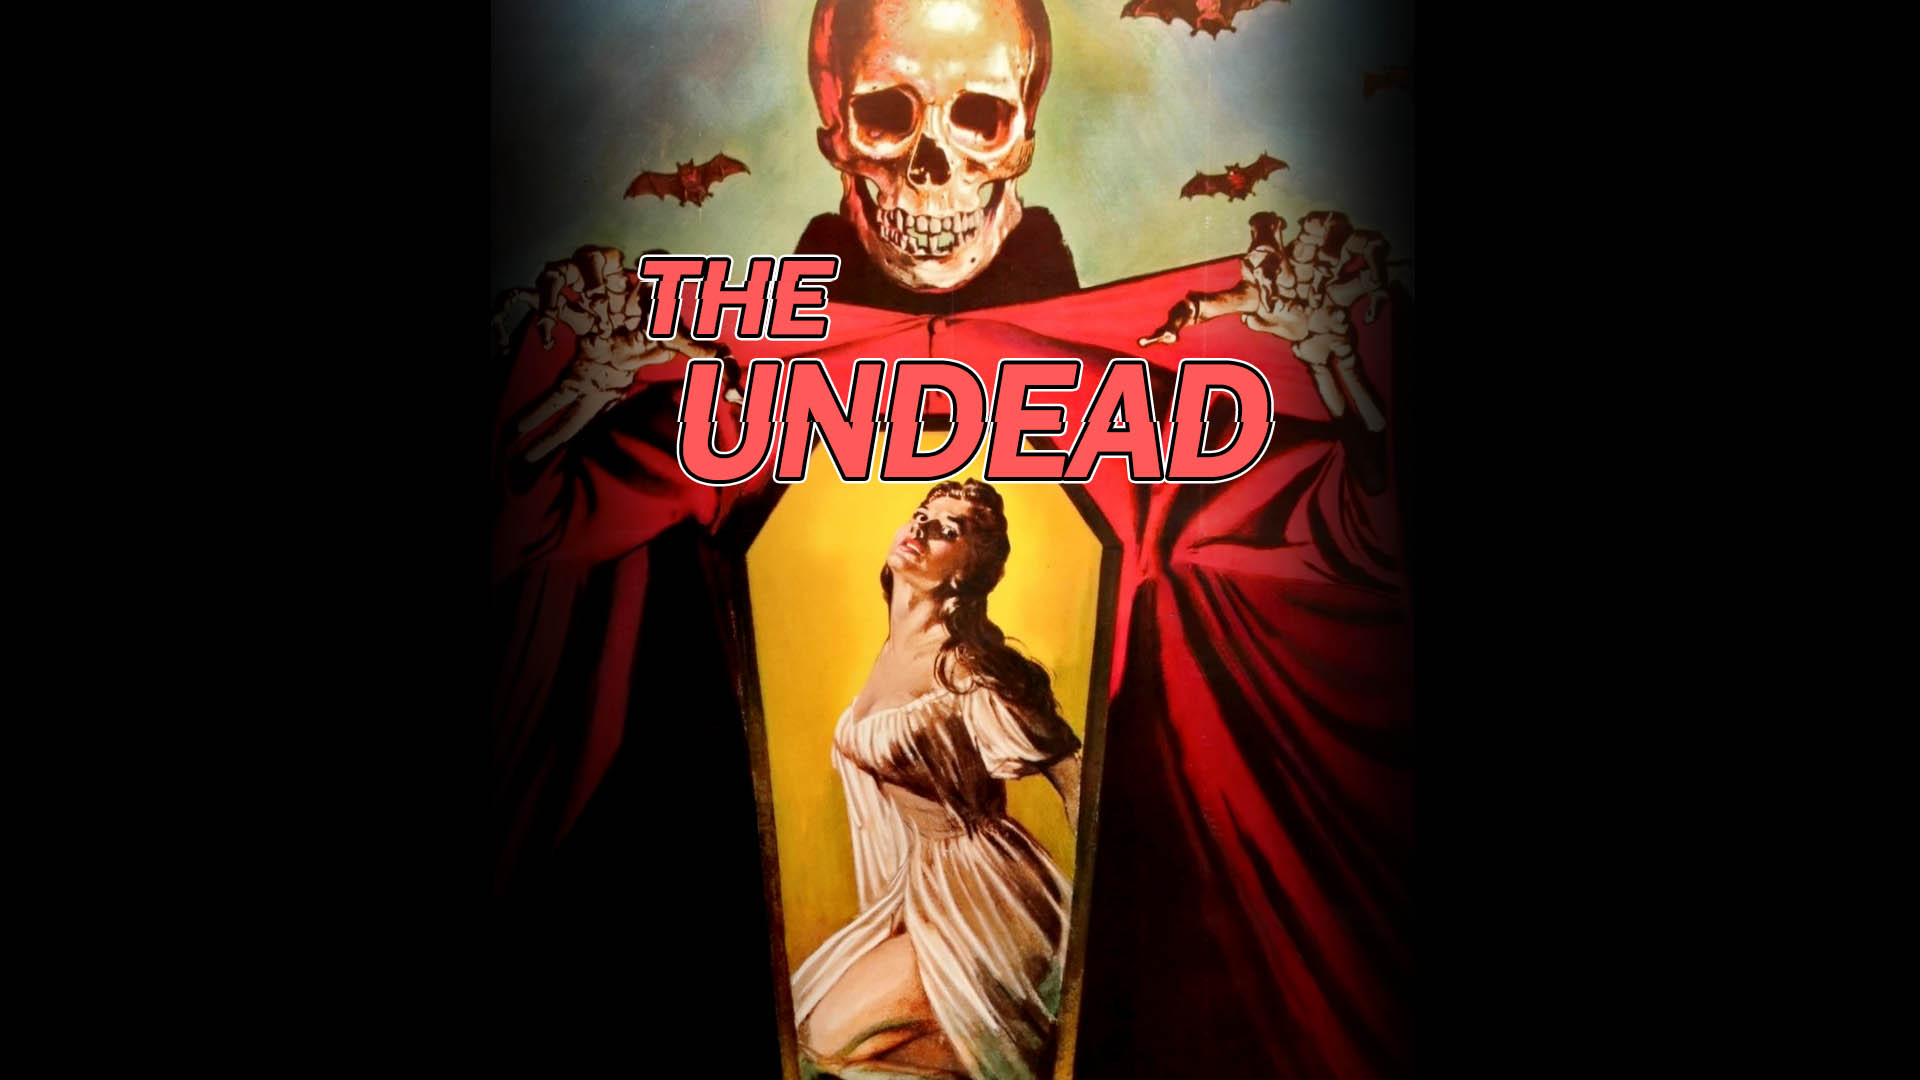 Watch Undead, The Online | Stream Full Movies